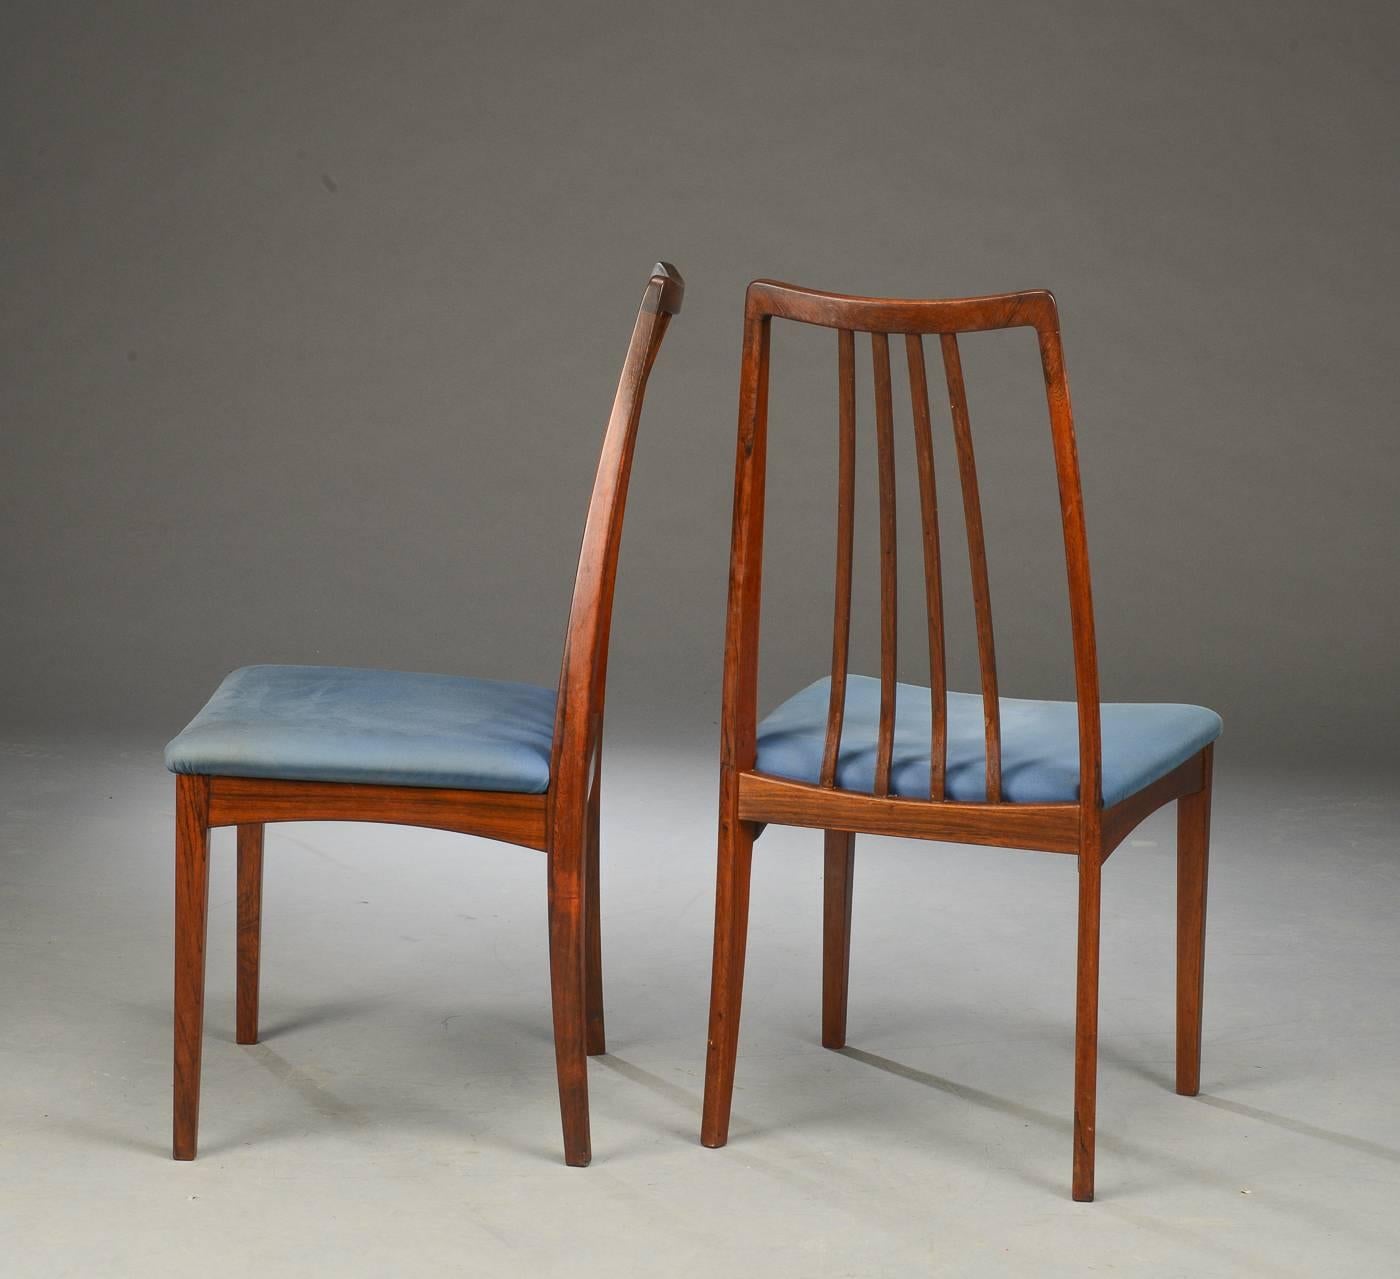 Hardwood frame, seat upholstered in blue fabric, produced by in Denmark in the 1960s. Wood in excellent condition, new upholstery is of course on request possible in any kind of leather or fabric of your choice. Please ask for more